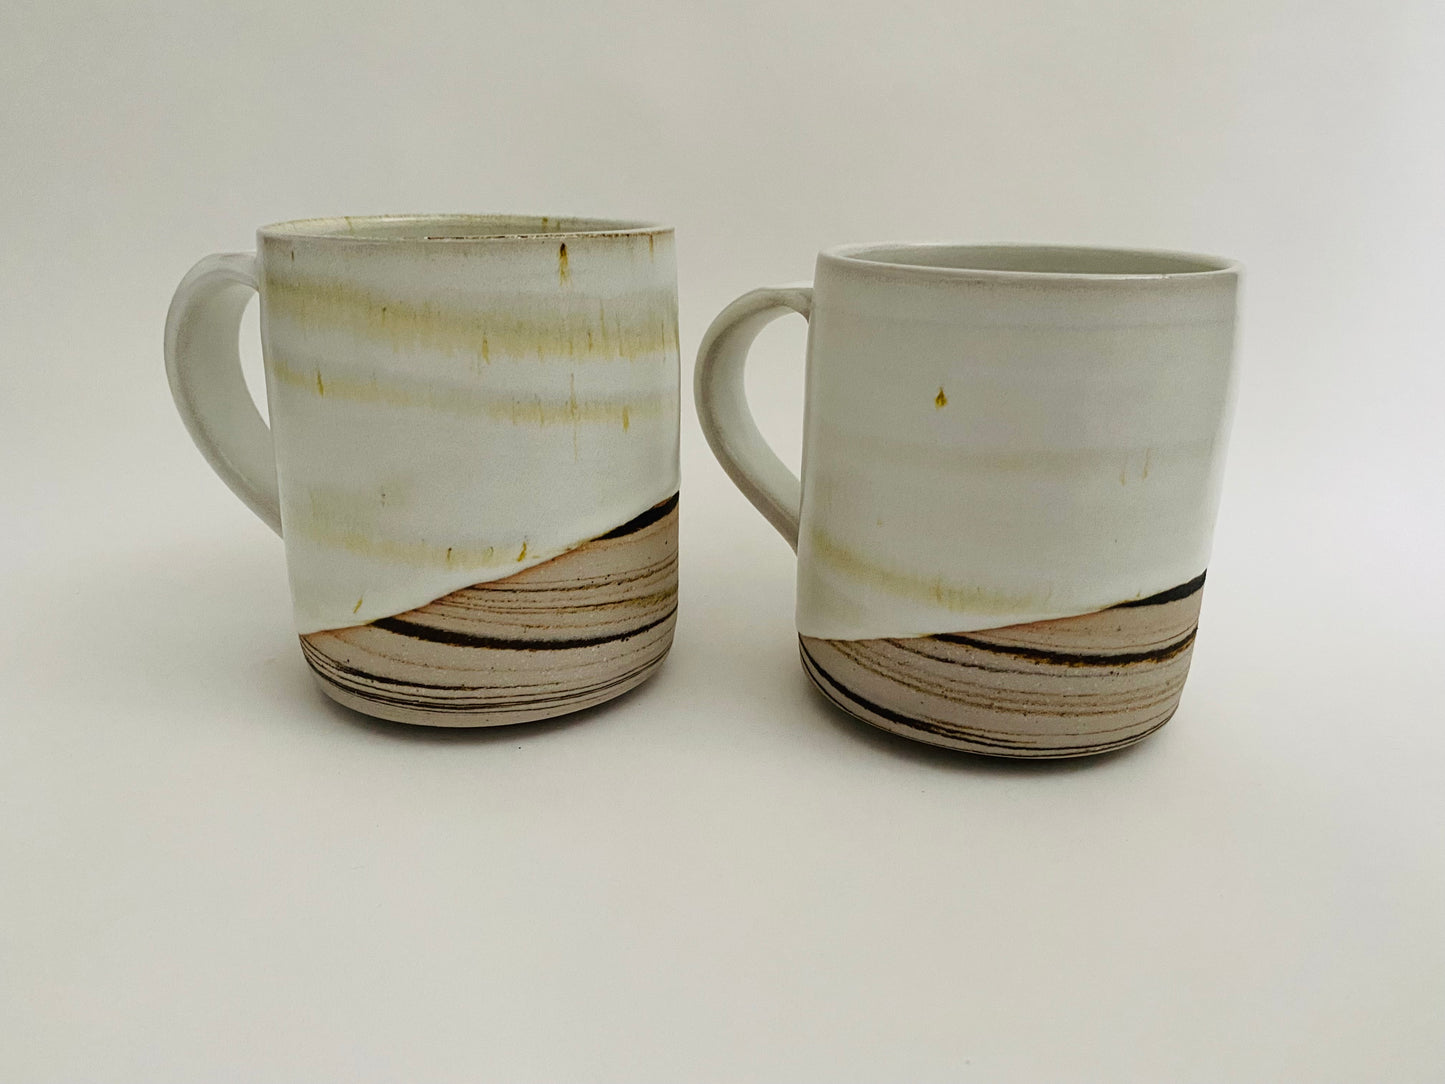 A pair of large mugs with marbleized clay